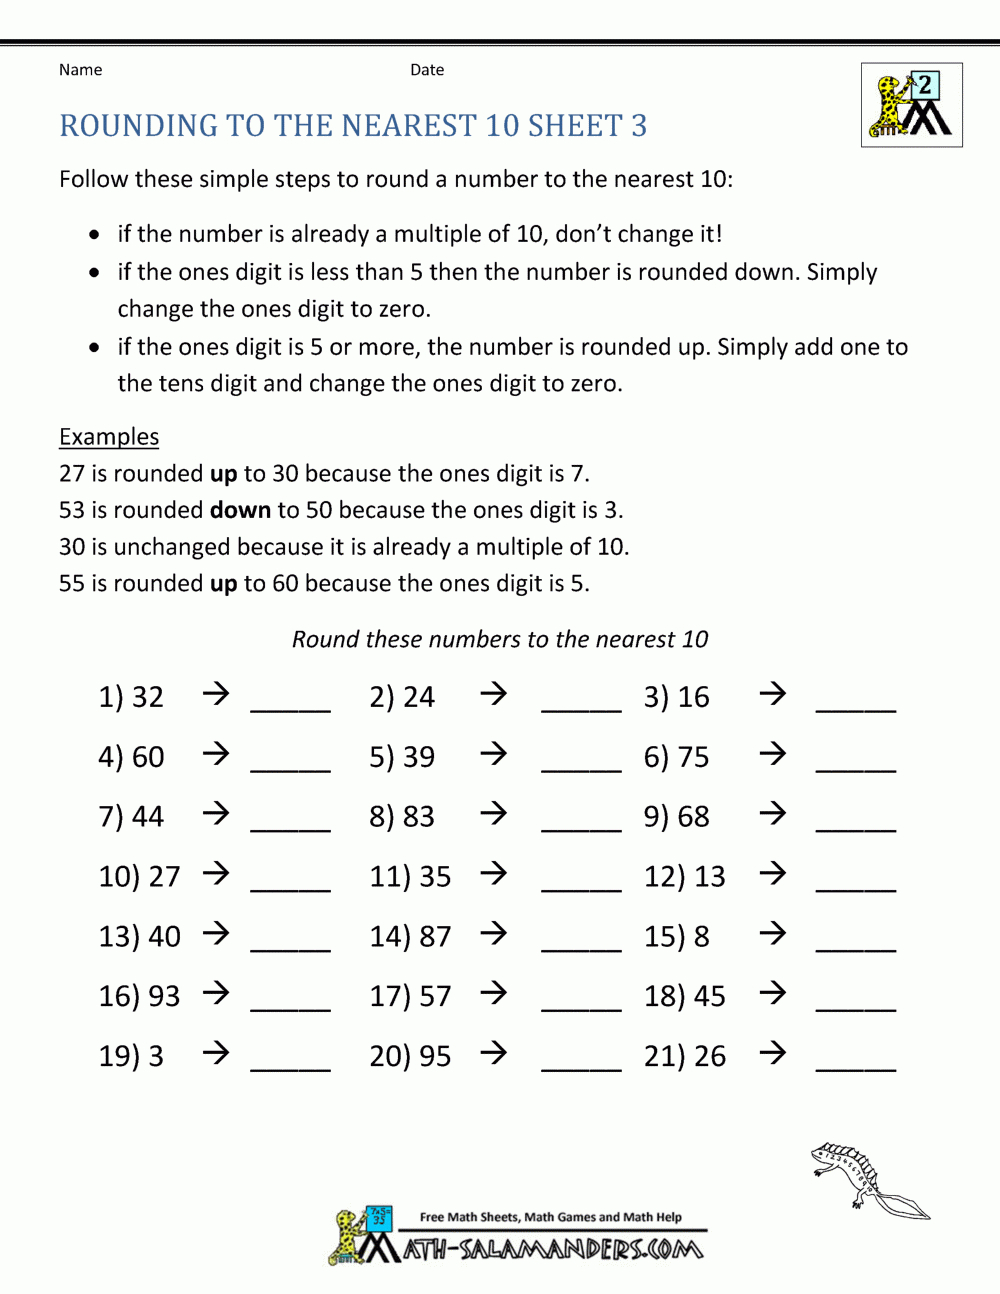 Rounding Worksheets 4Th Grade db excel com